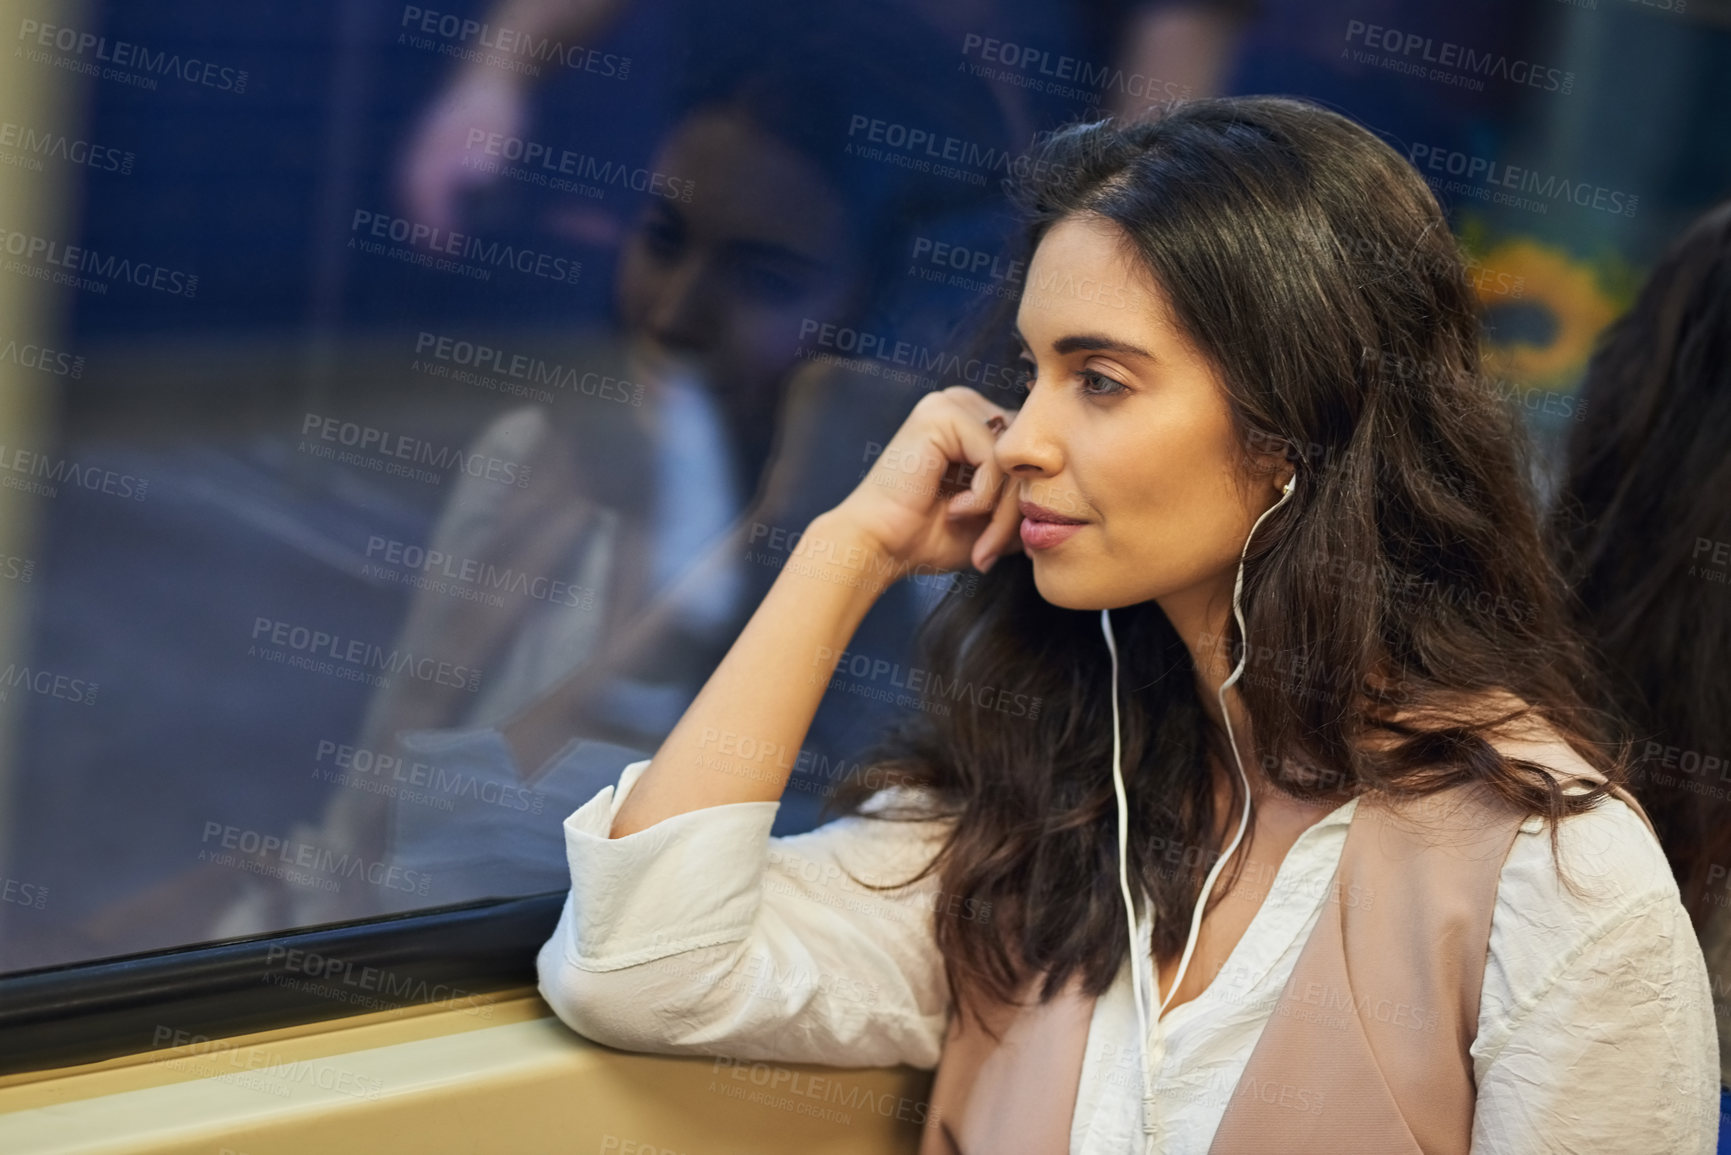 Buy stock photo Cropped shot of a young attractive woman listening to music while commuting with the train